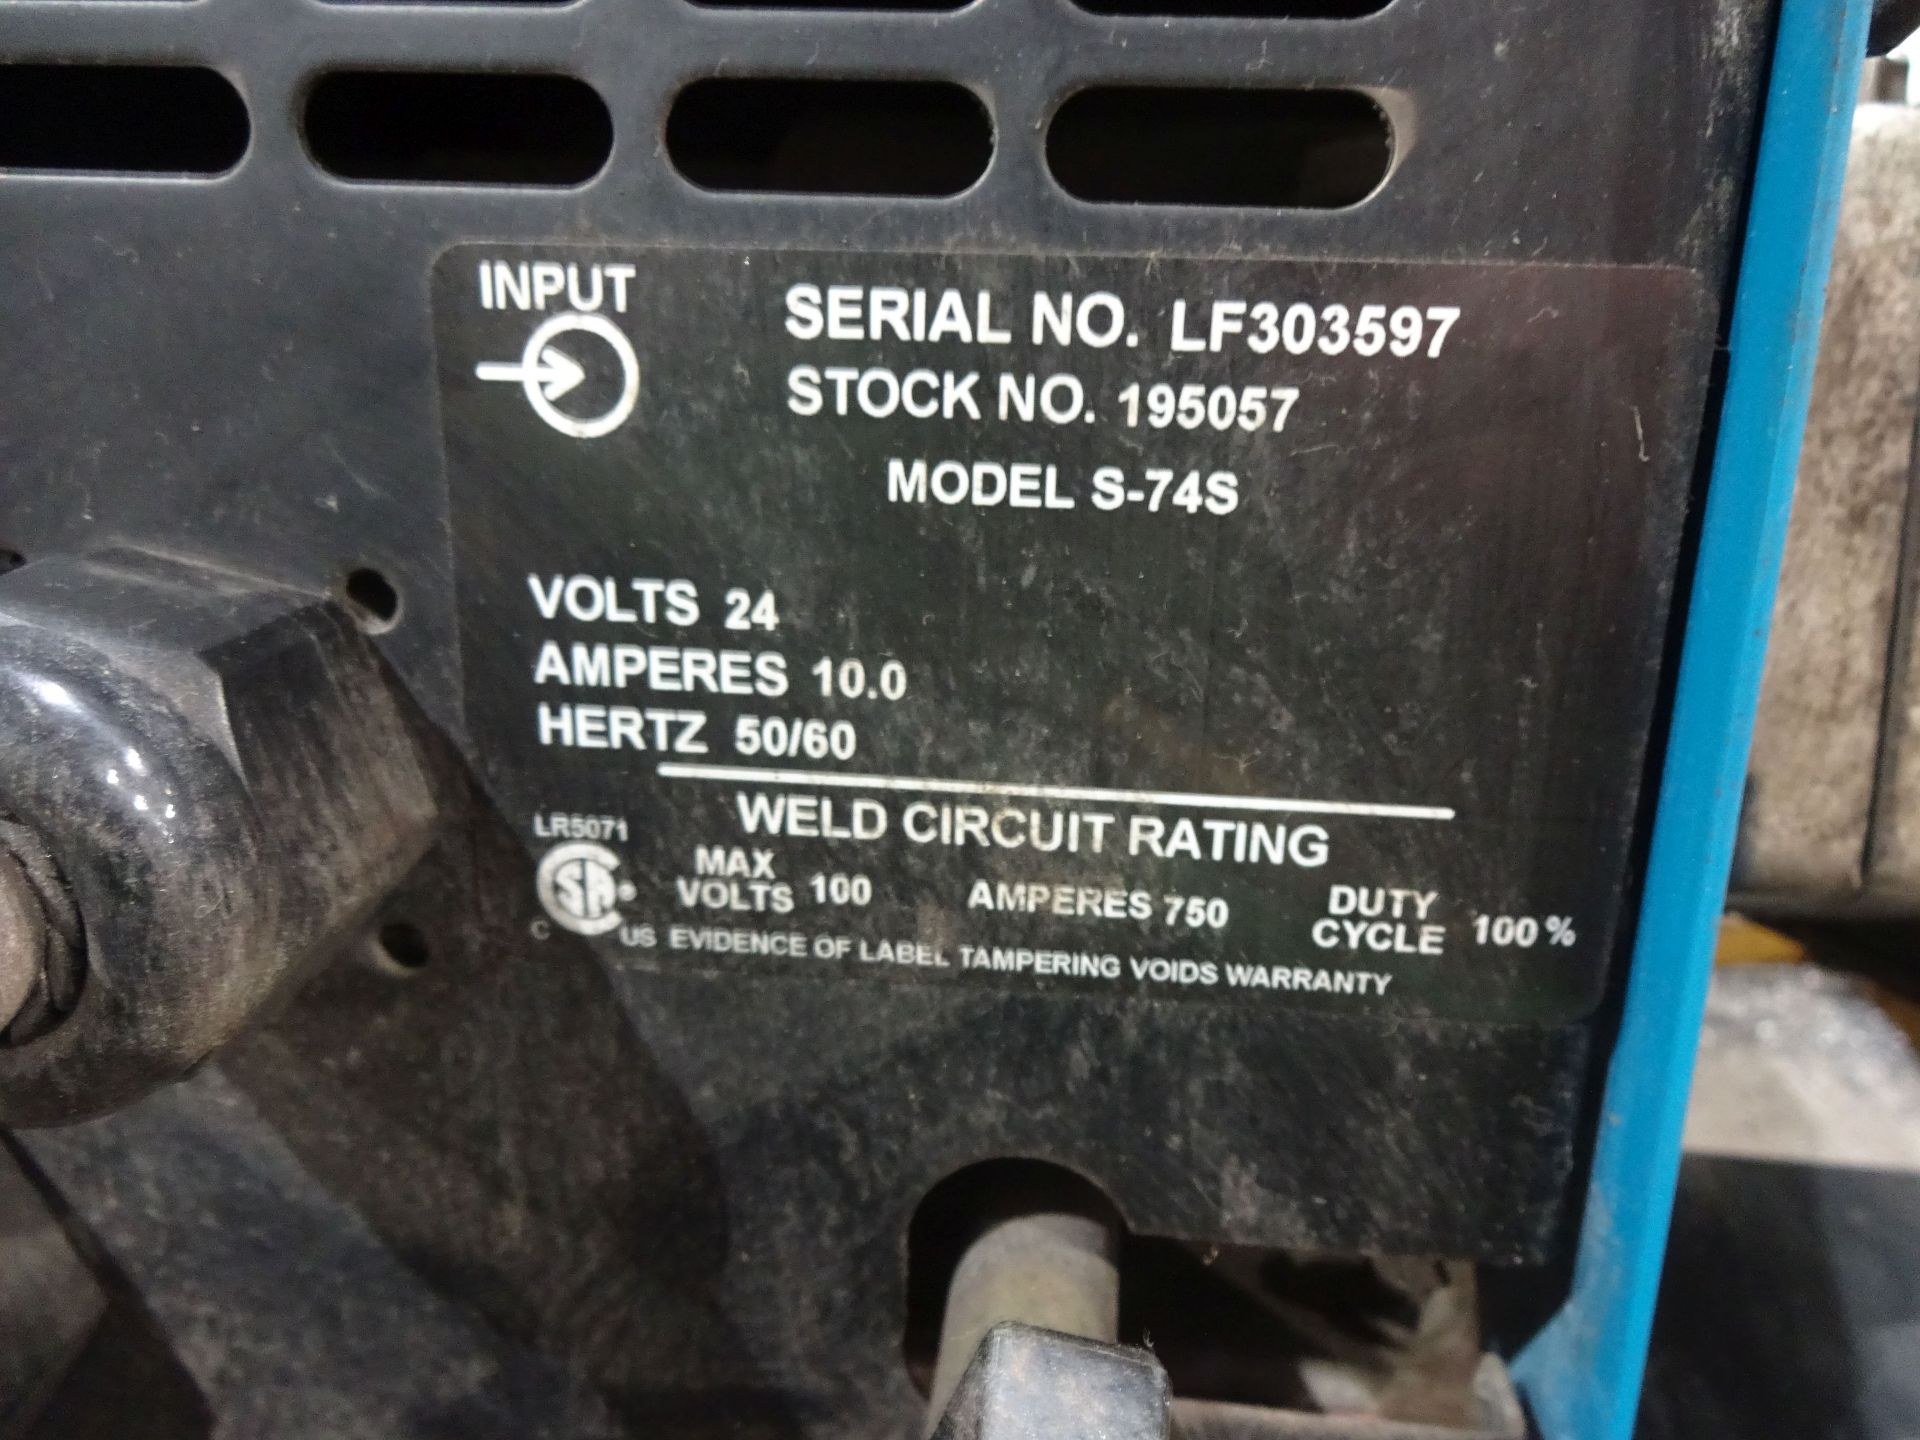 MILLER XMT-304 WELDER WITH MODEL 70 SERIES WIRE FEED - LOADING CHARGE DUE TO INDUSTRIAL SERVICES AND - Image 6 of 6